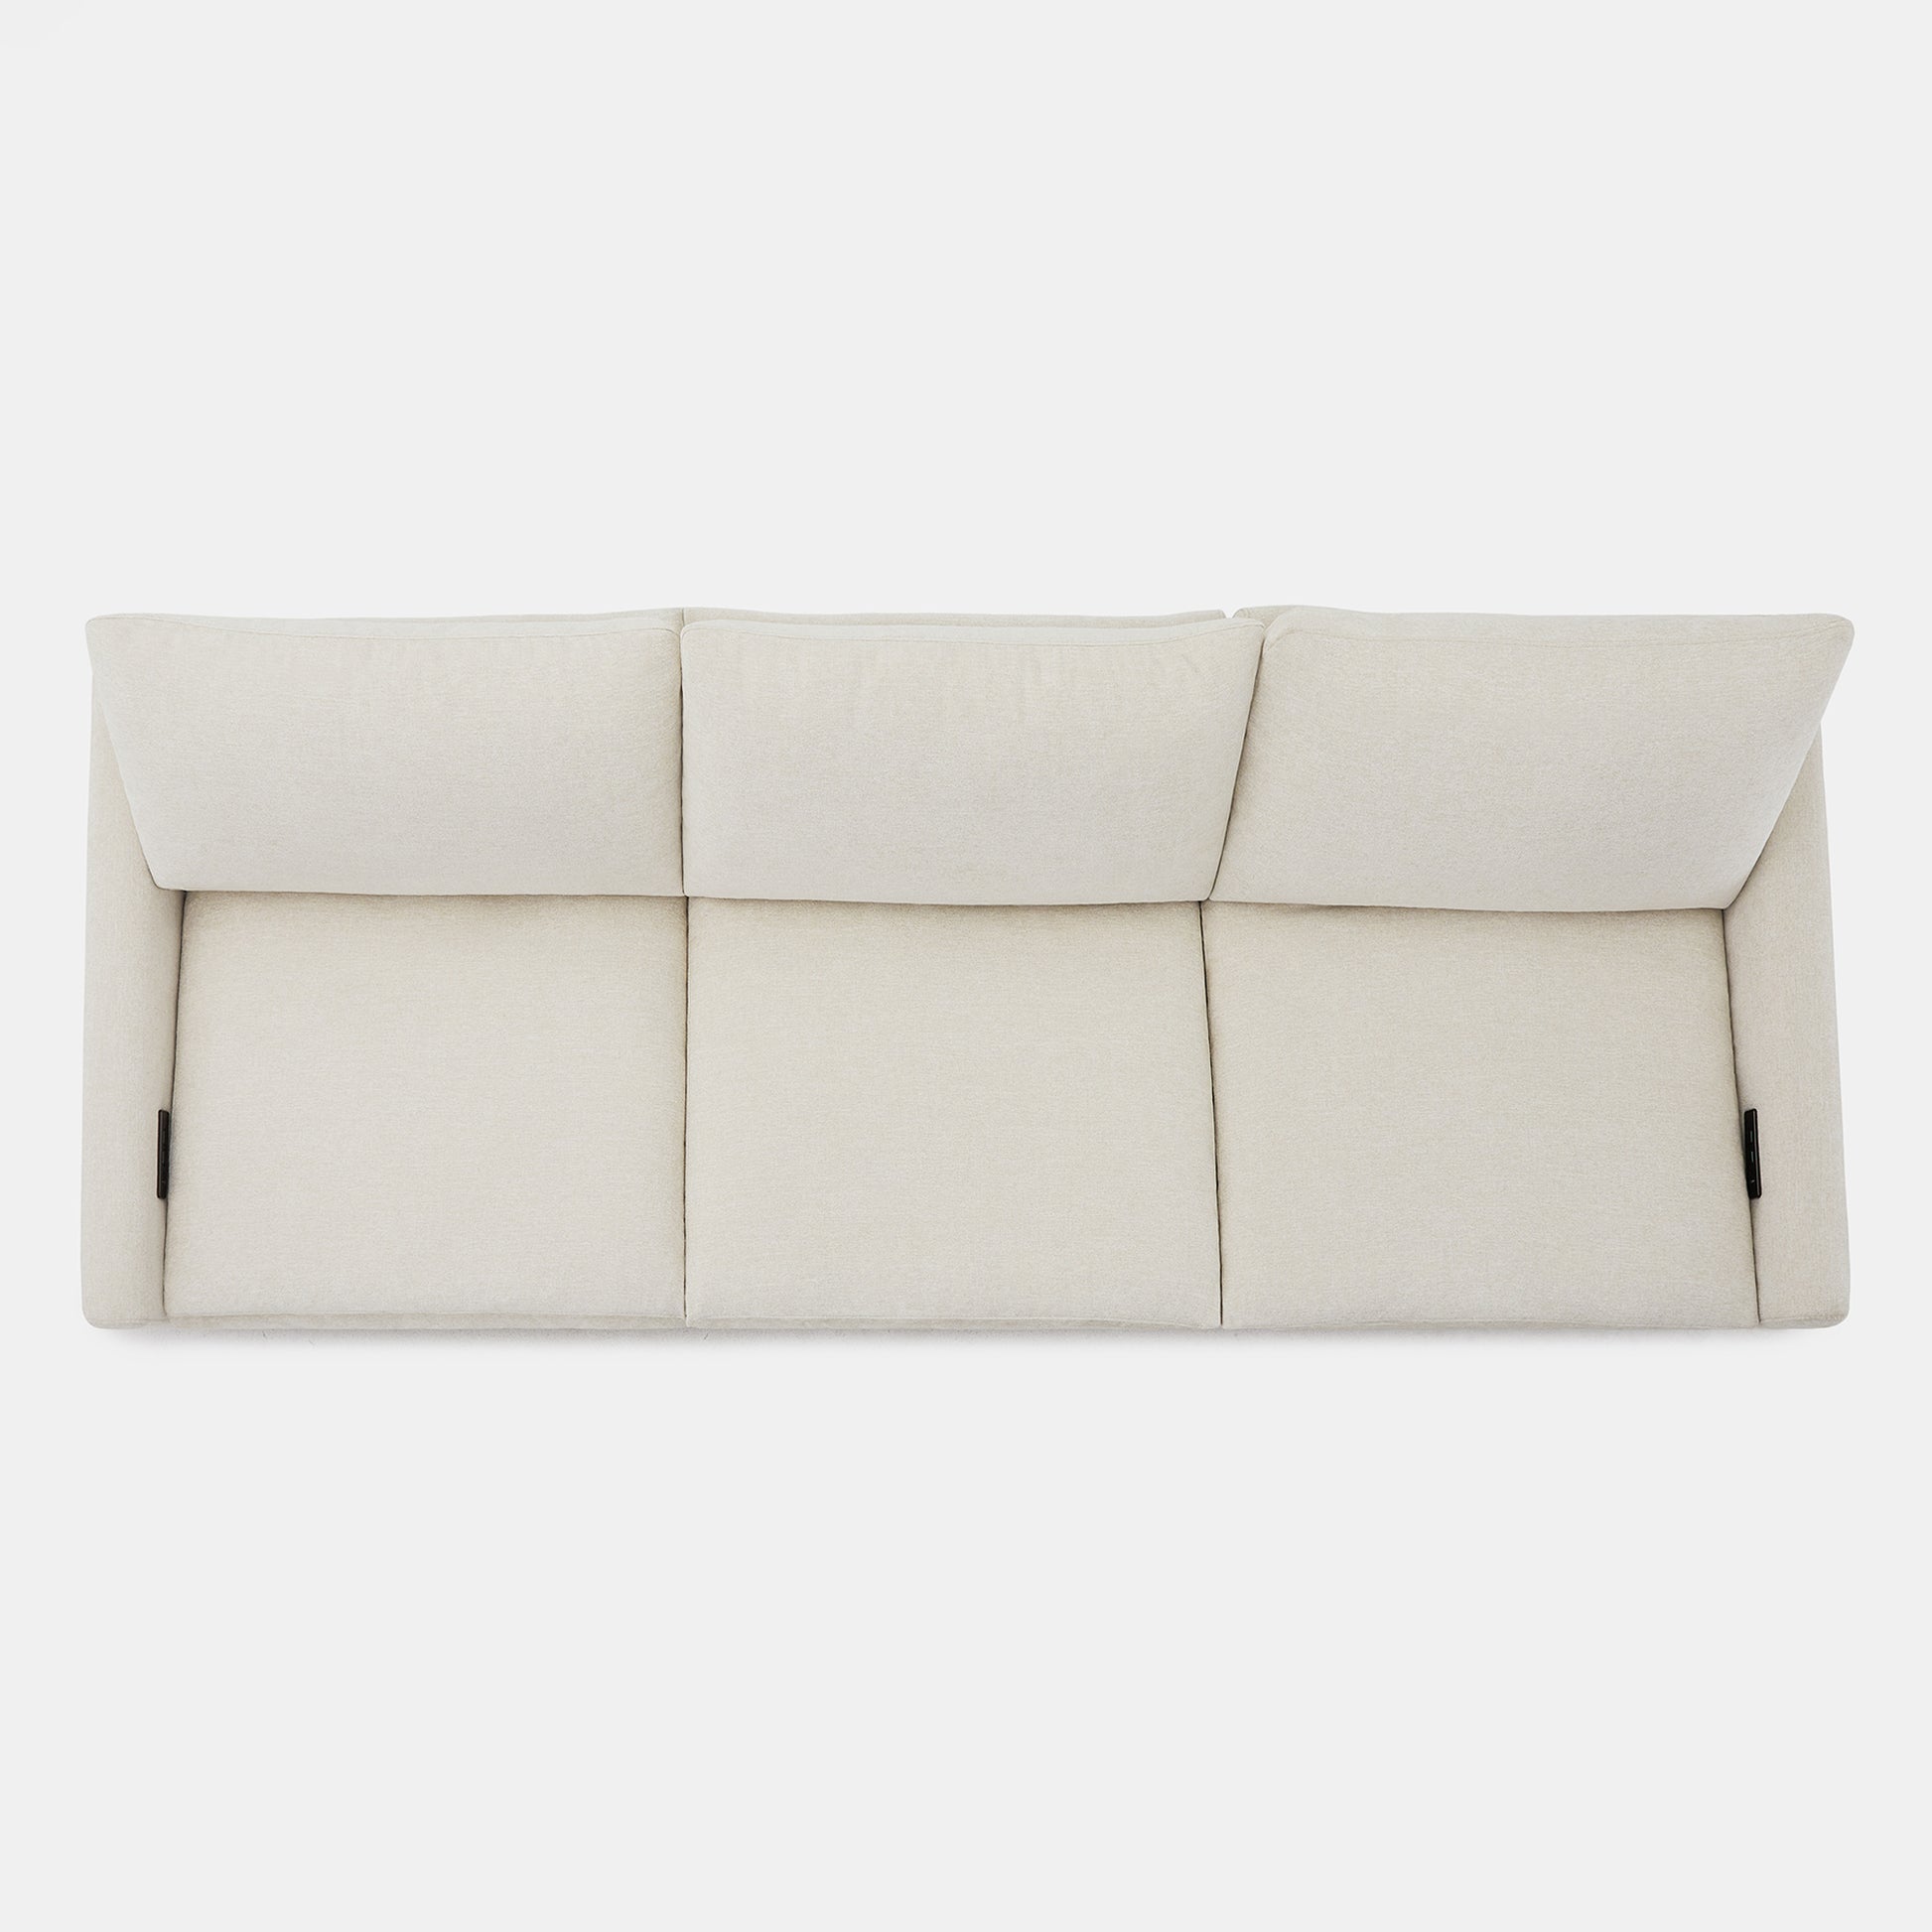 CHITA 3 seater couch